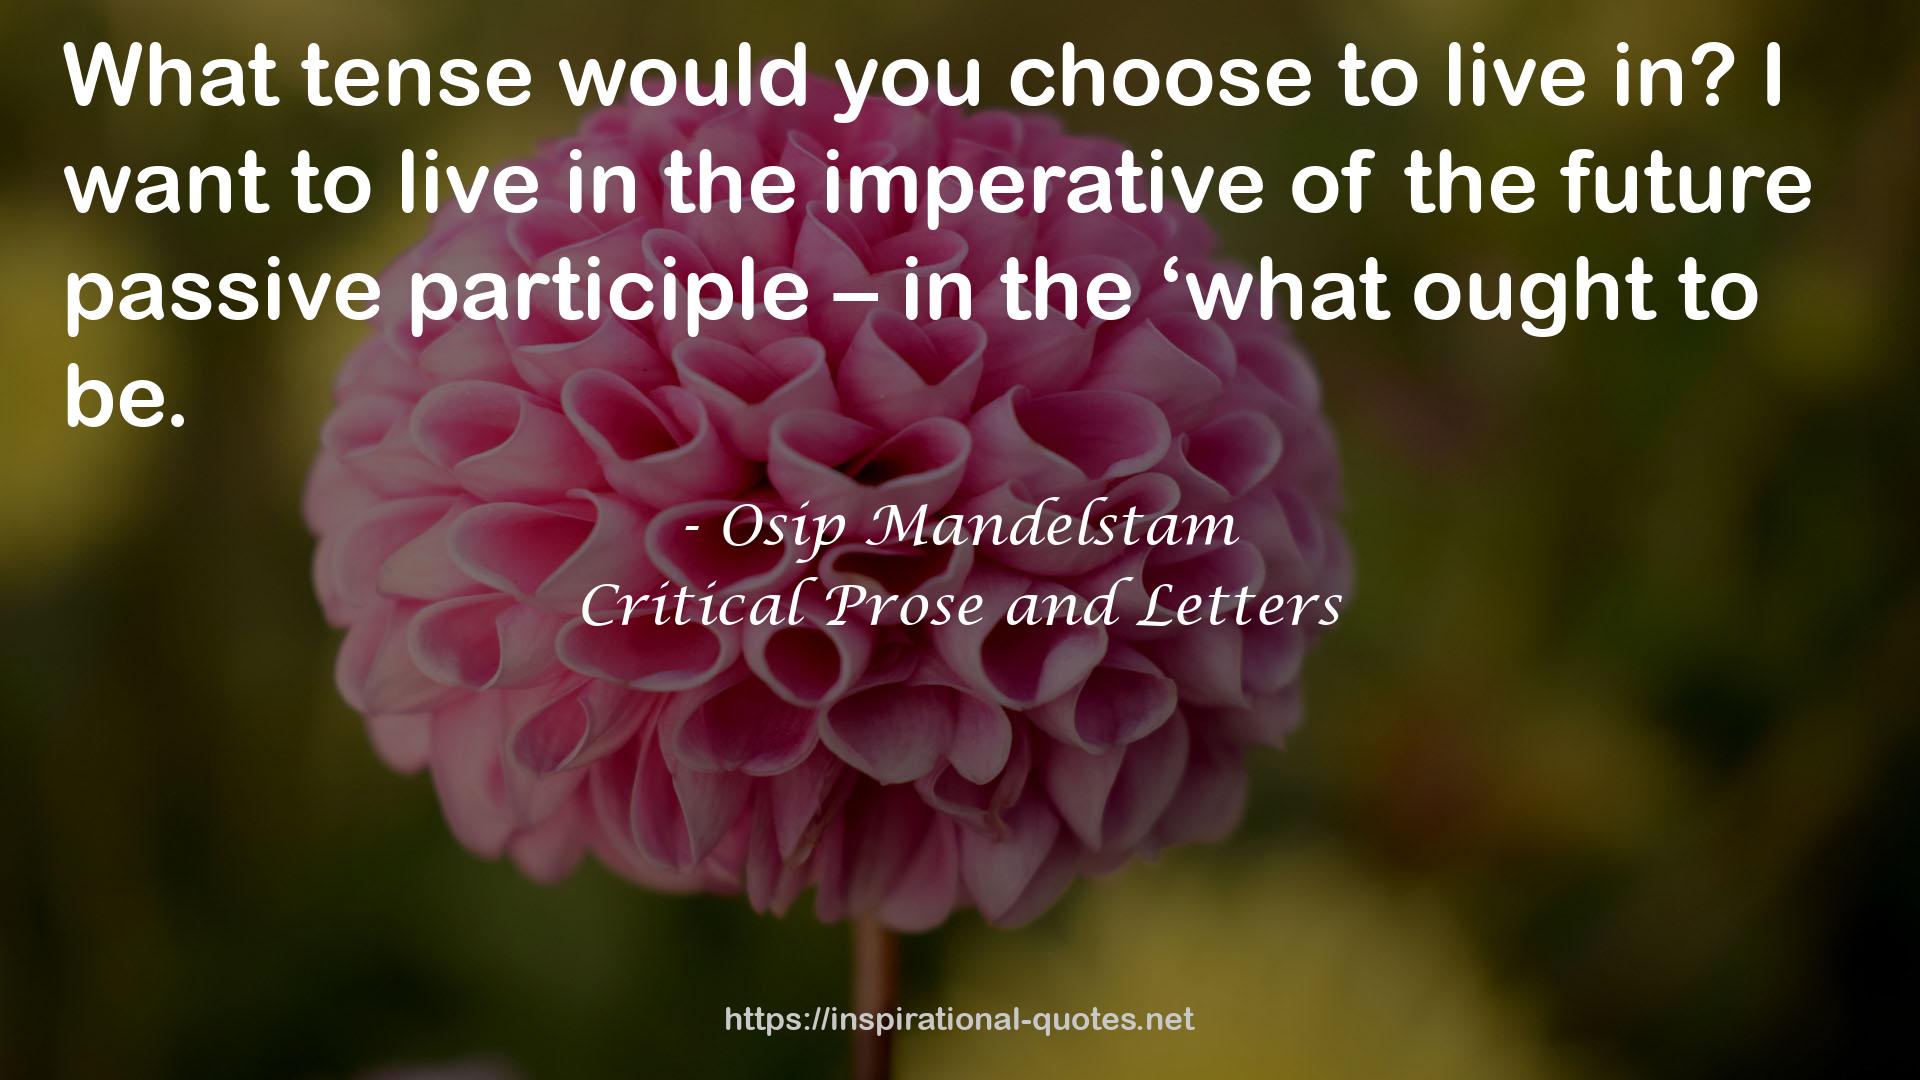 Critical Prose and Letters QUOTES